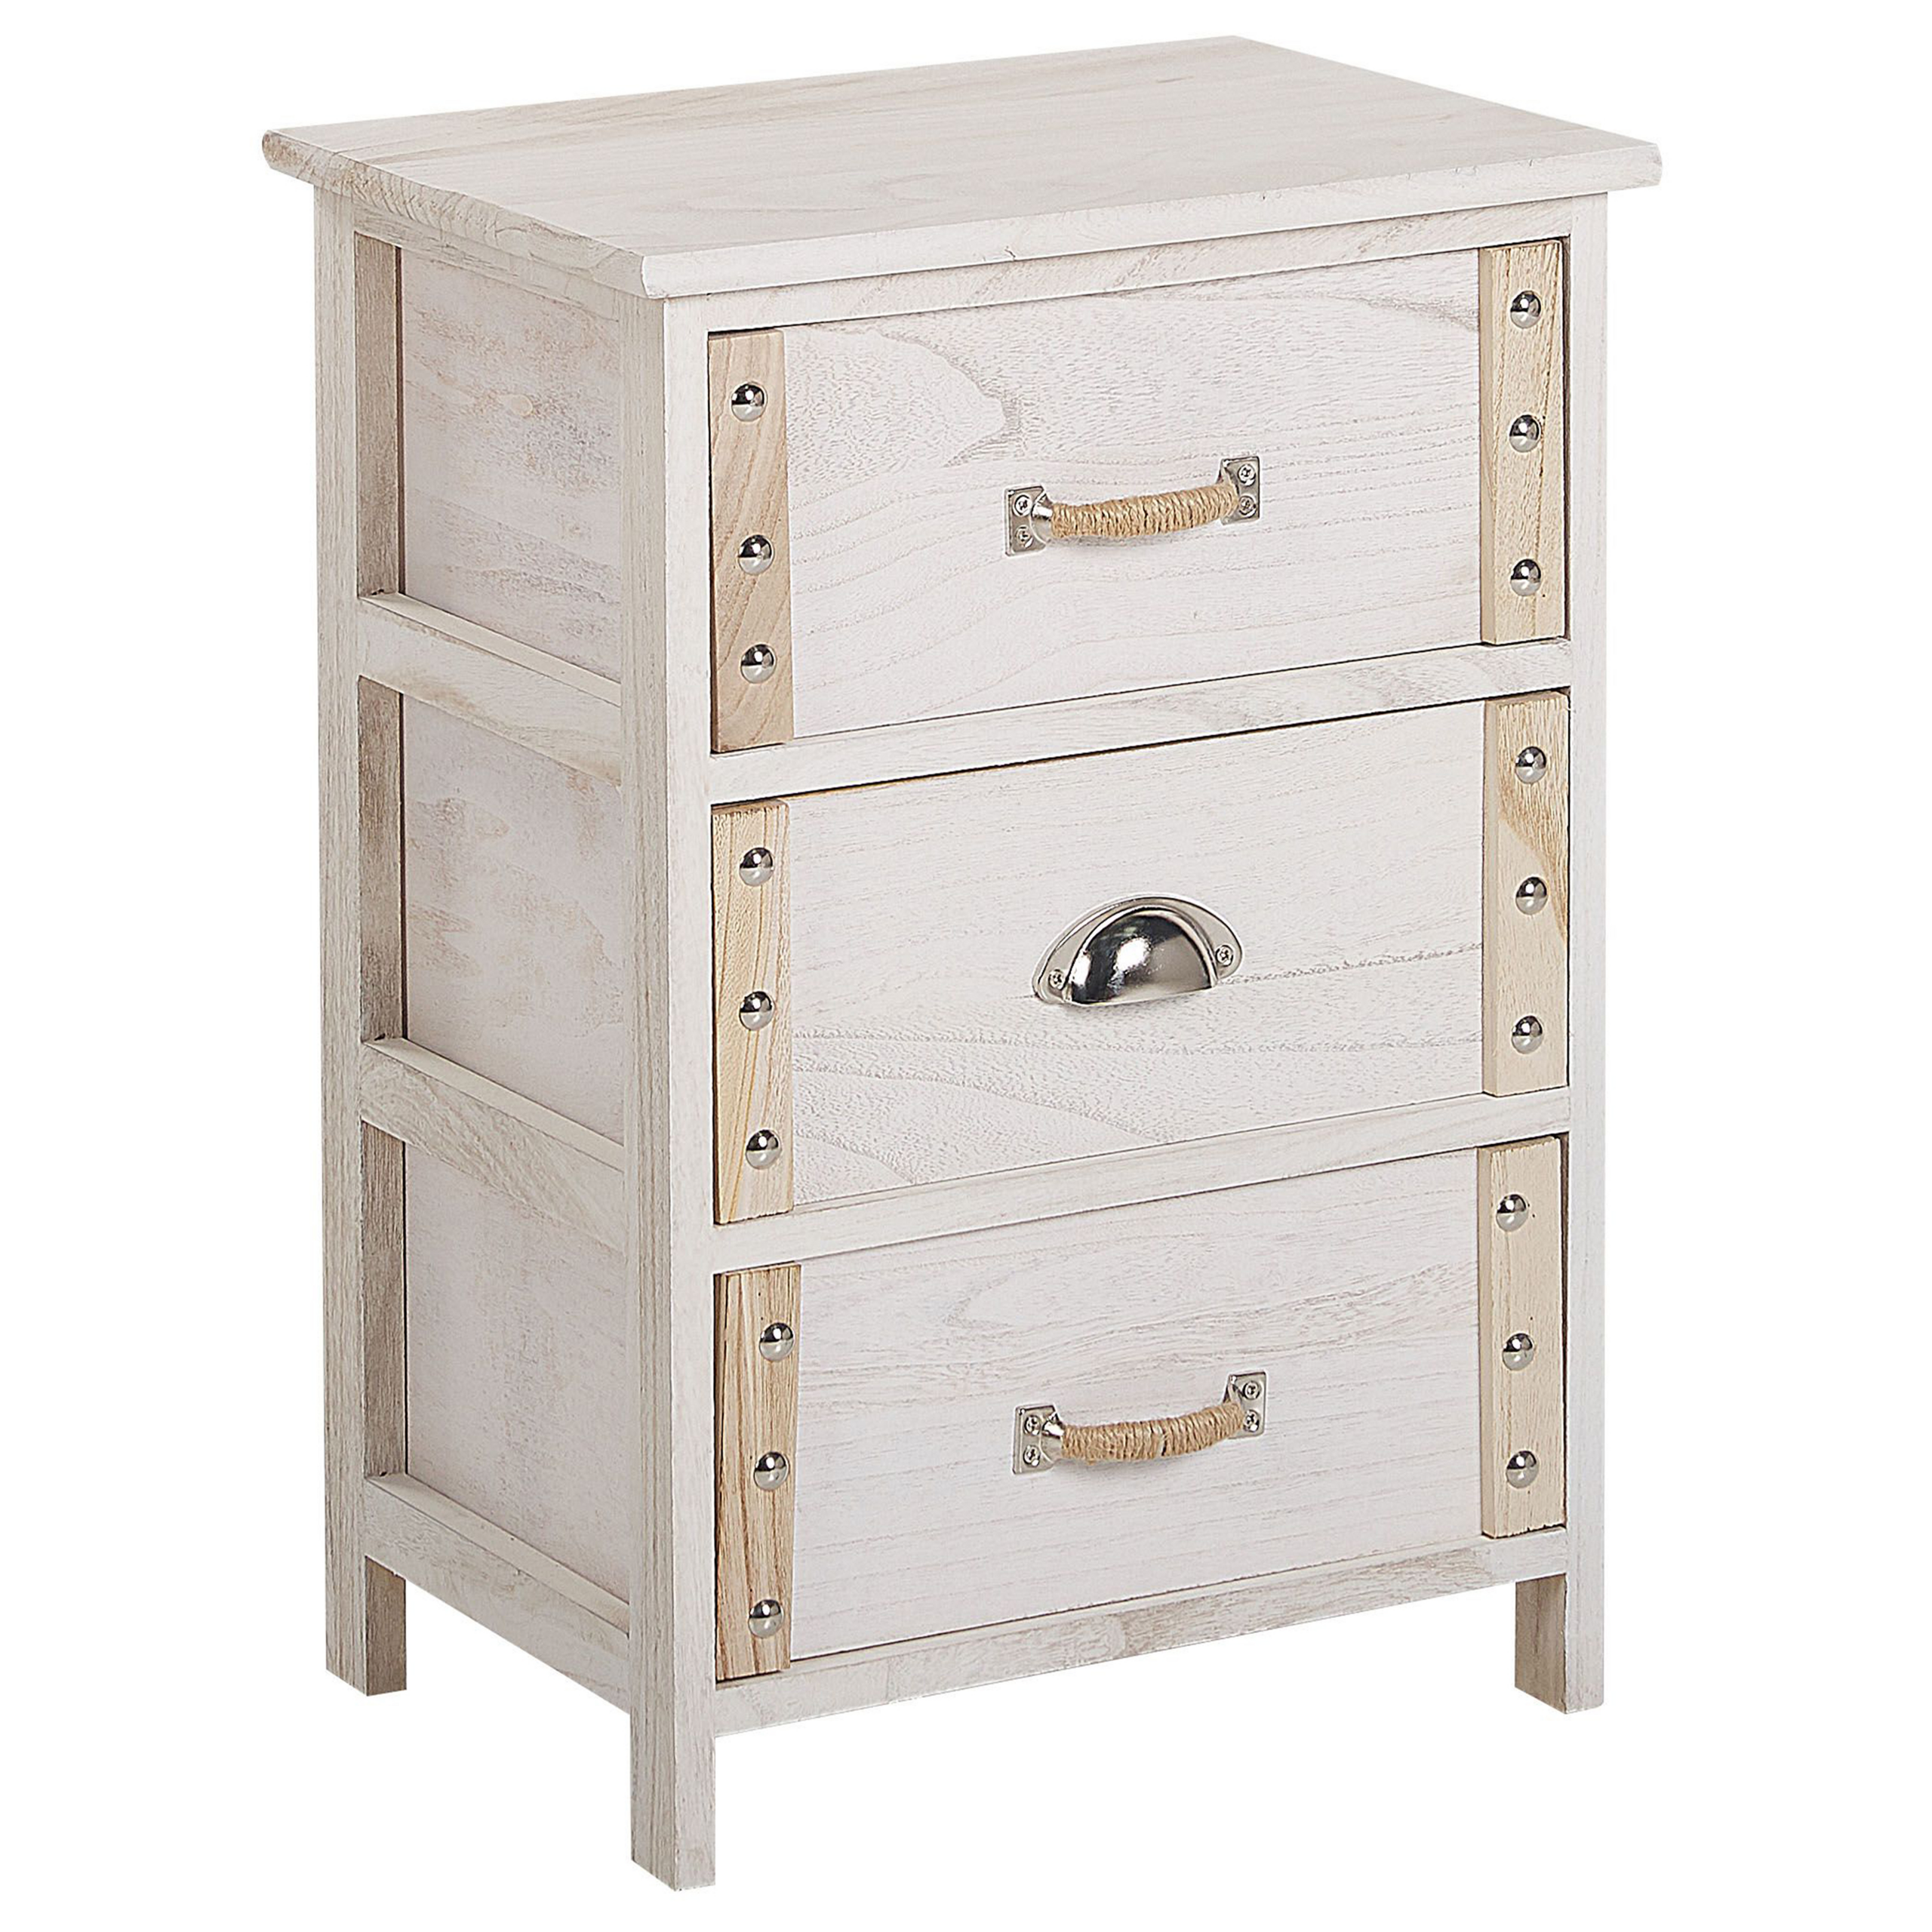 Beliani Bedside Table White with Light Wood MDF Solid Wood Odd Elements 3 Drawers Eclectic Boho Bedroom